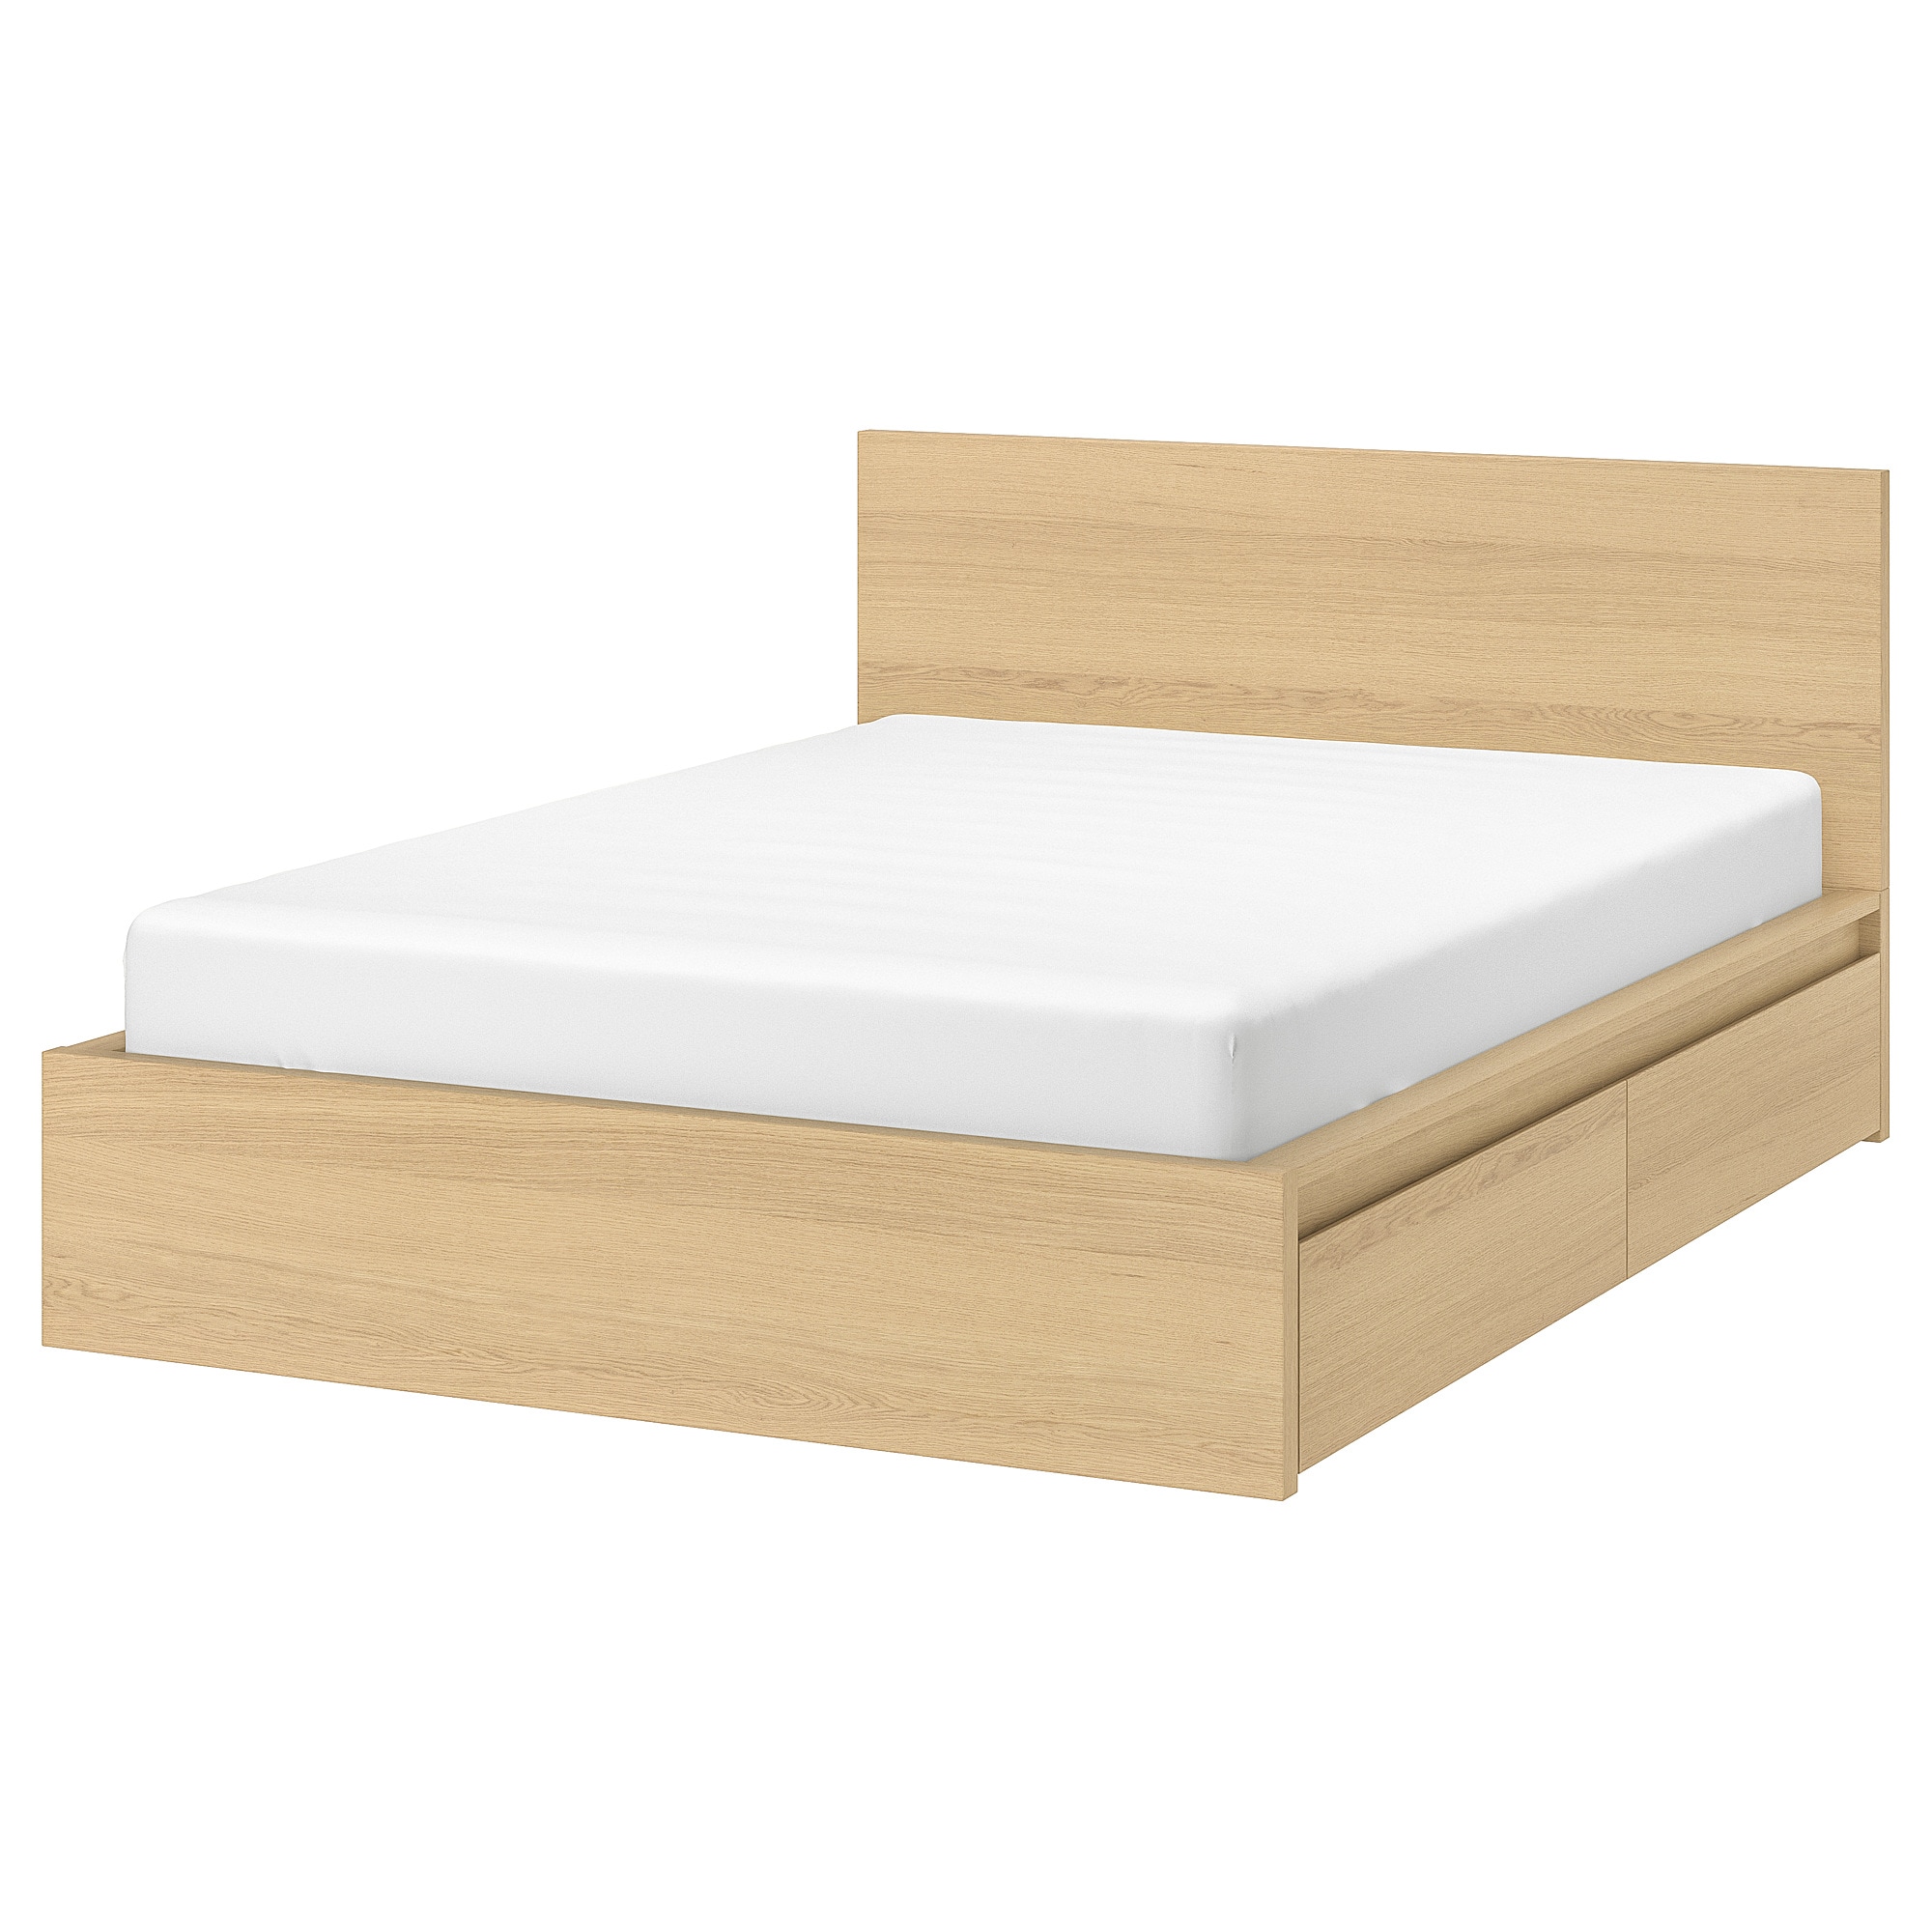 Malm Bed Frame High Luroy With 2, High King Size Bed Frame With Storage